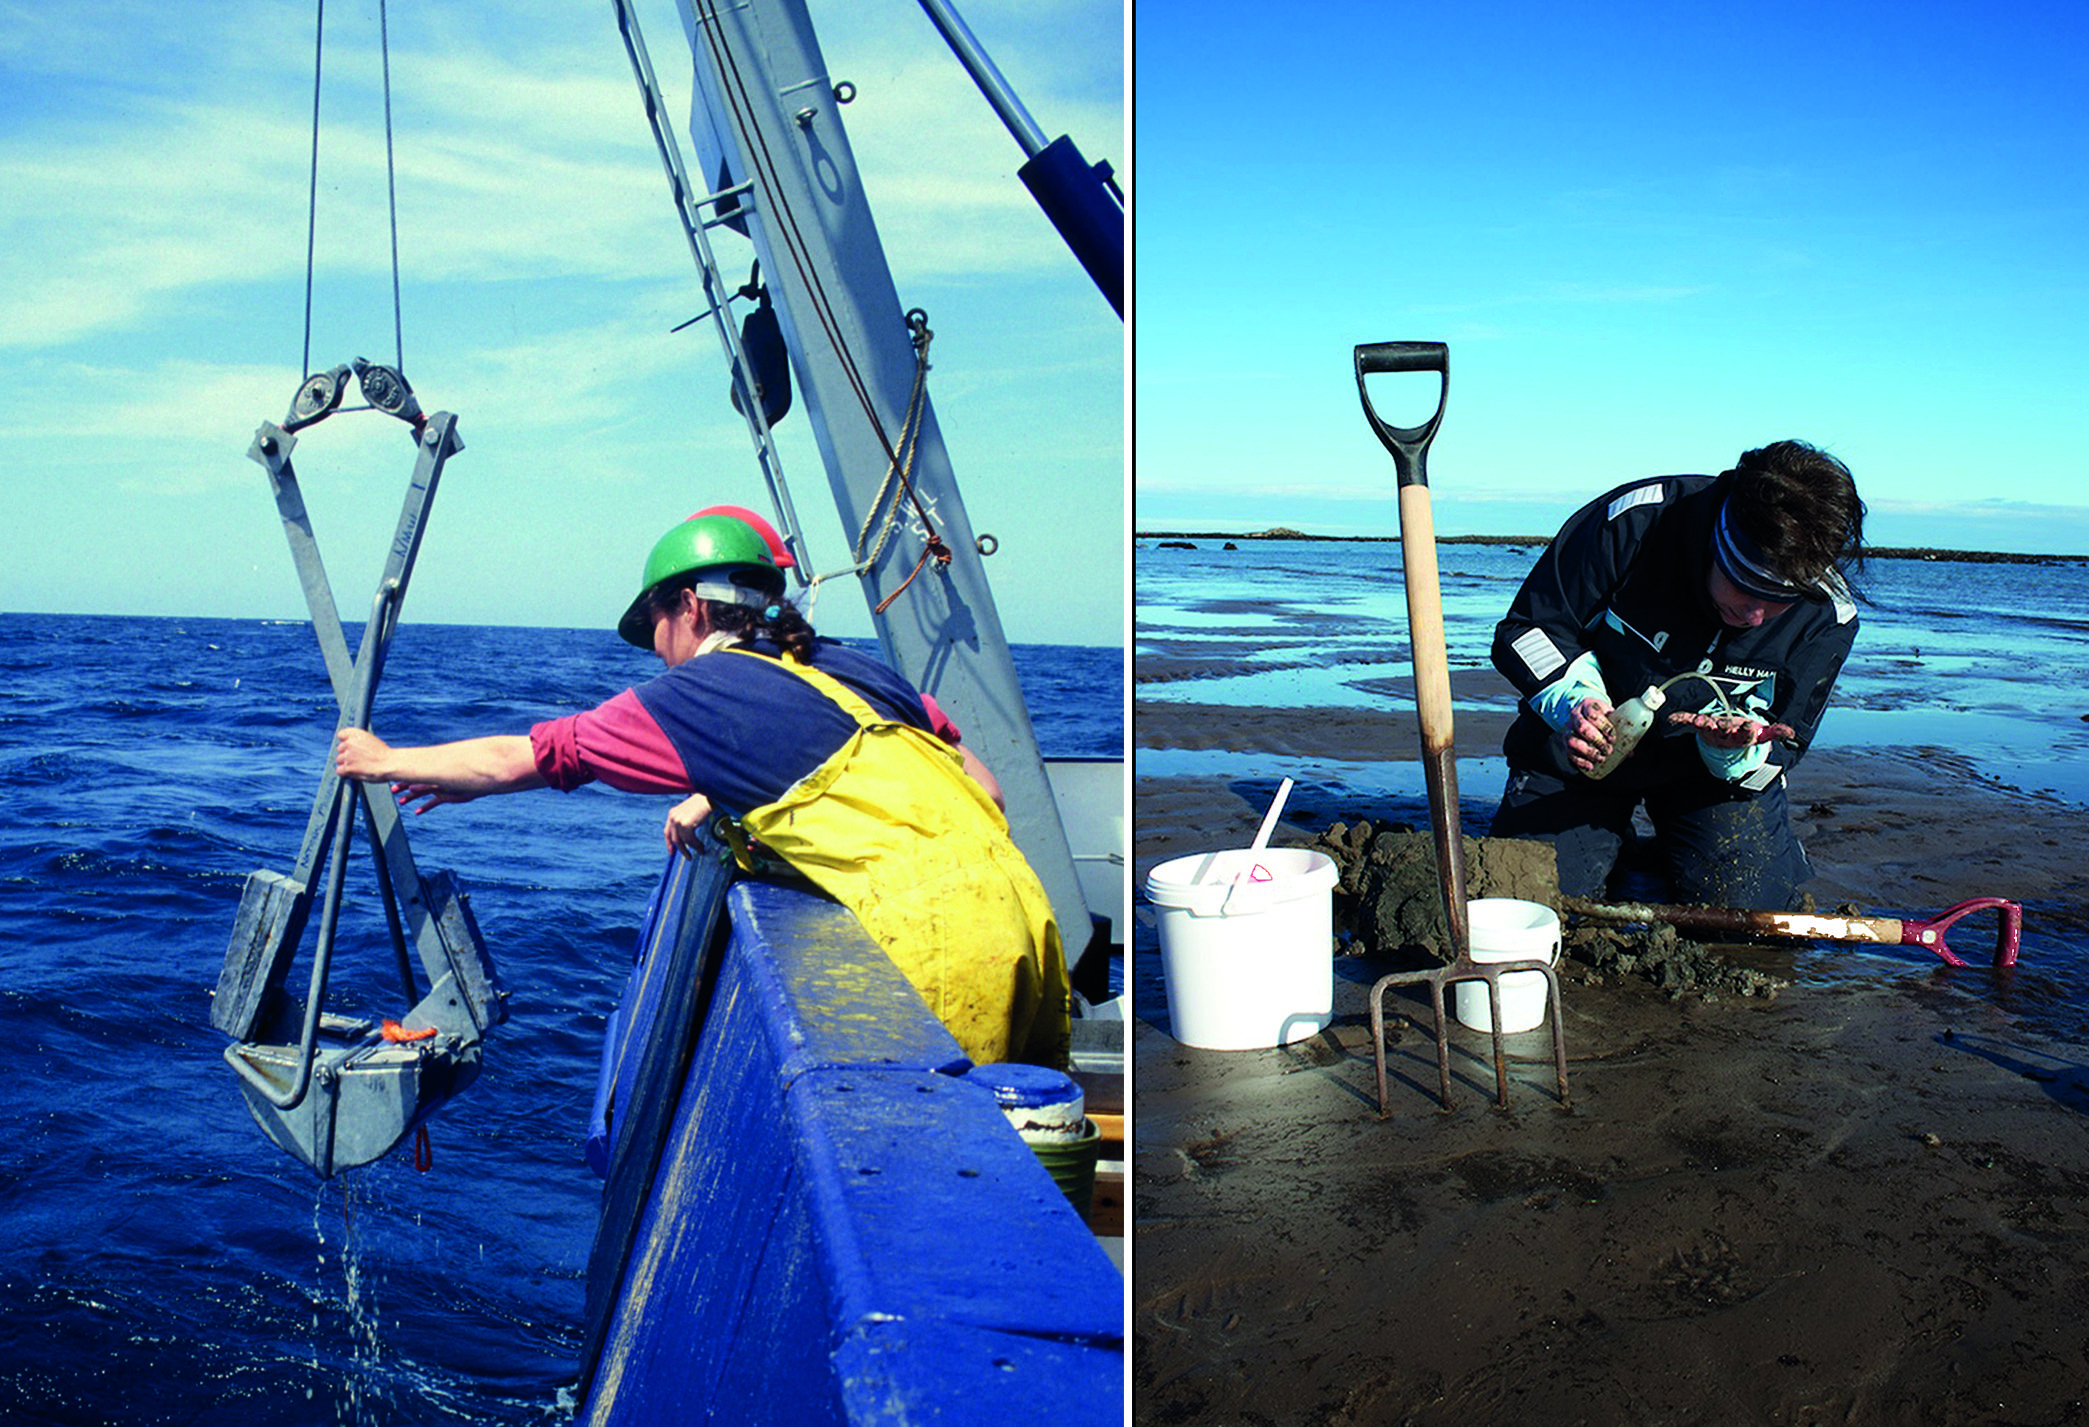 Museum staff collect specimens both onshore and offshore